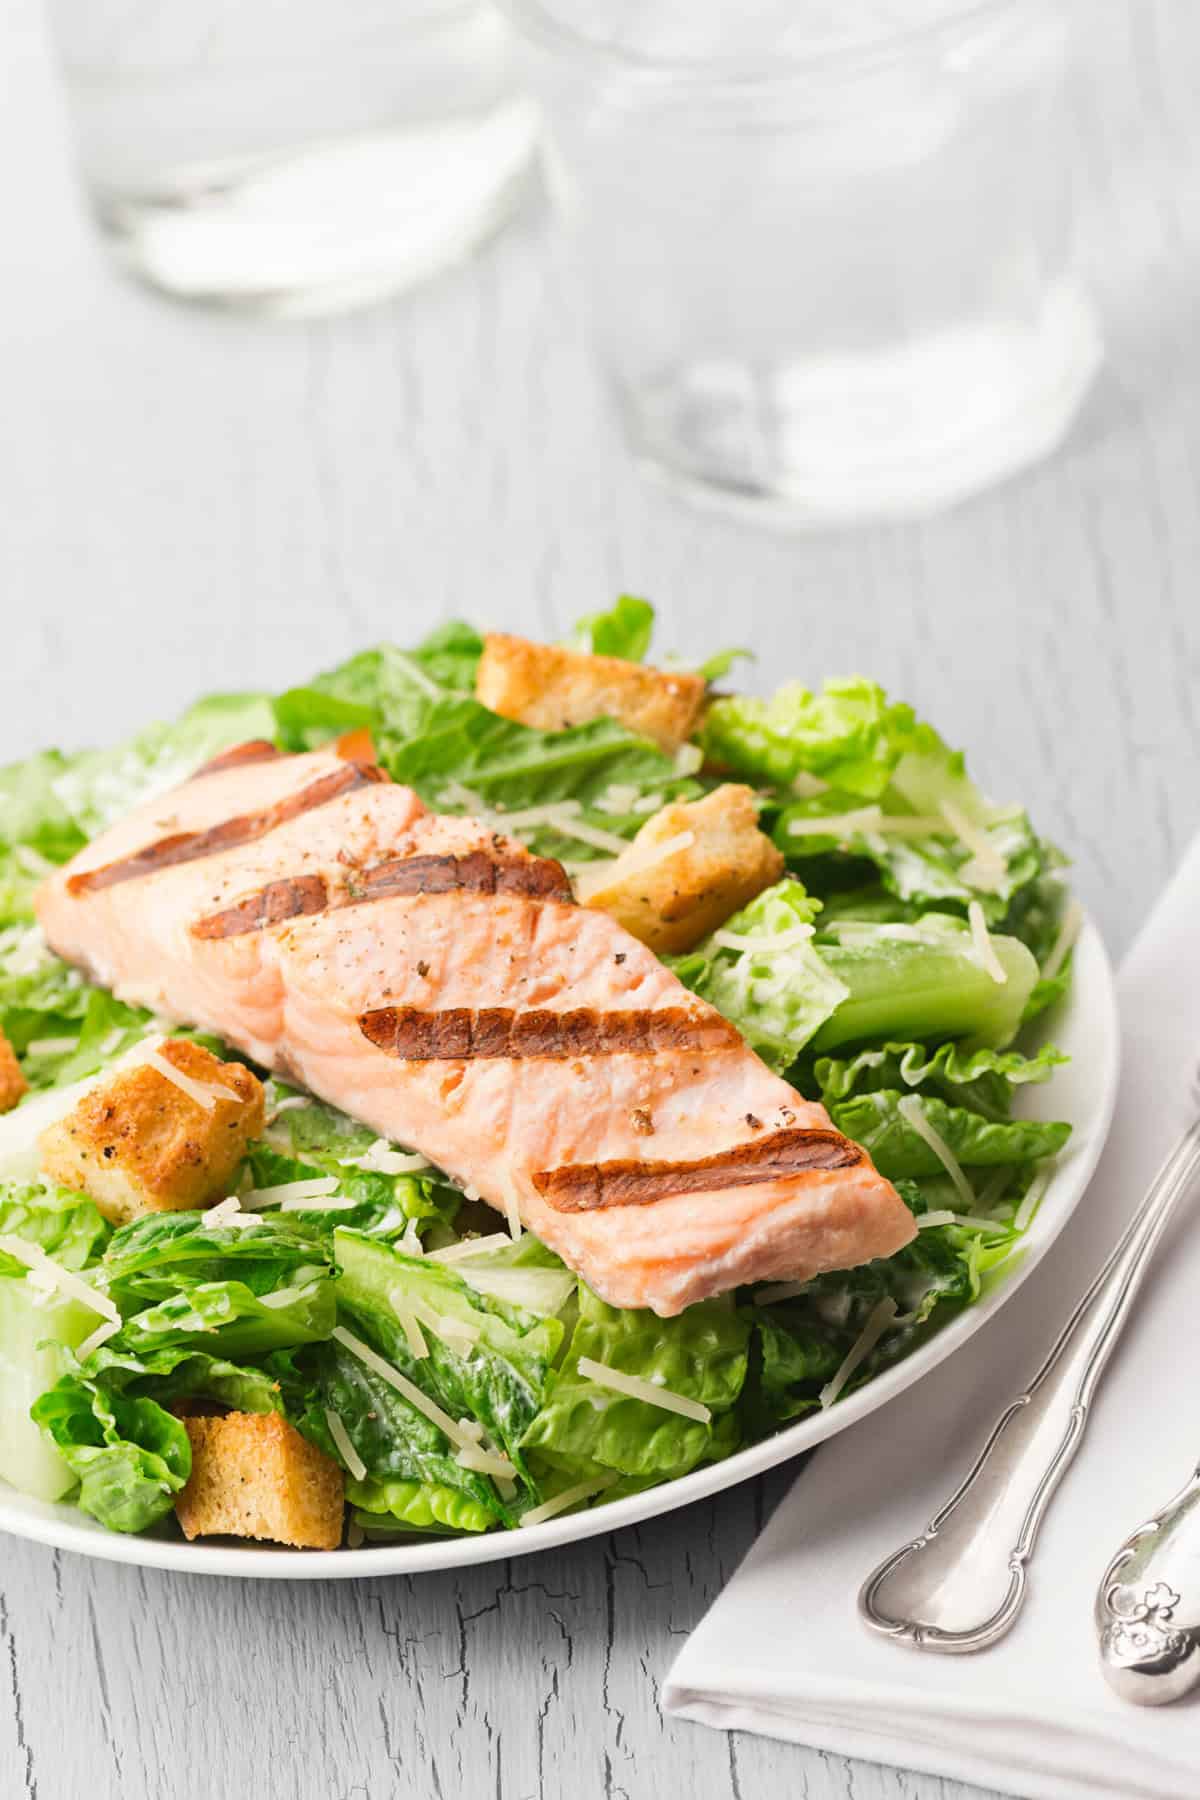 A piece of grilled salmon sitting on a bed of Caesar salad, served in a white shallow bowl.